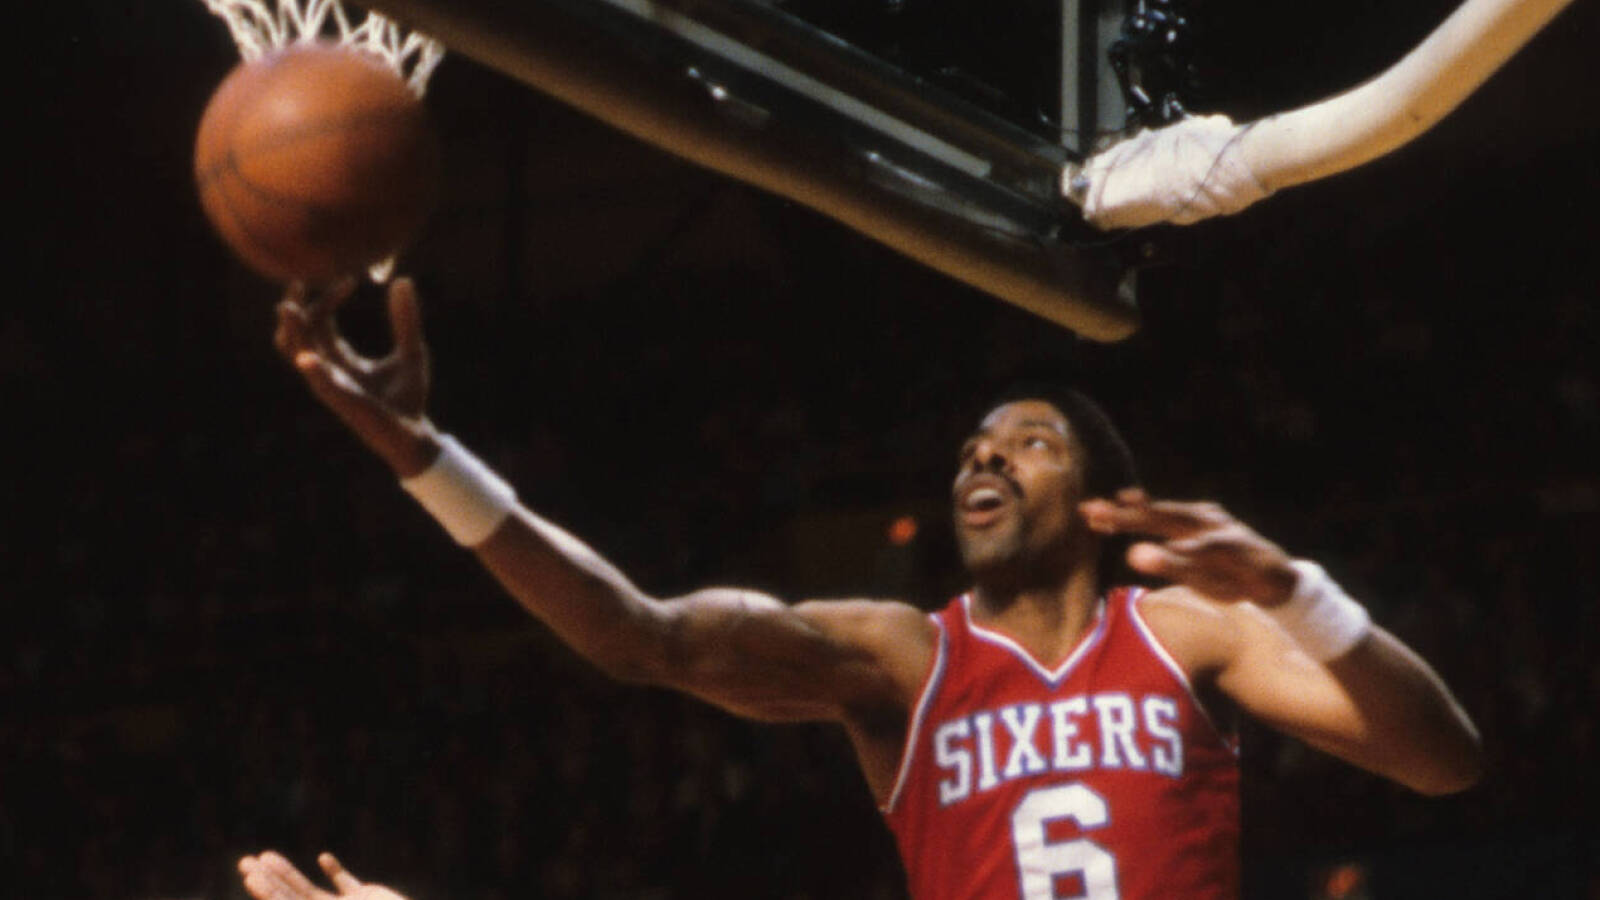 Watch: Dr. J's 'Rock the Cradle' slam dunk on 40th anniversary